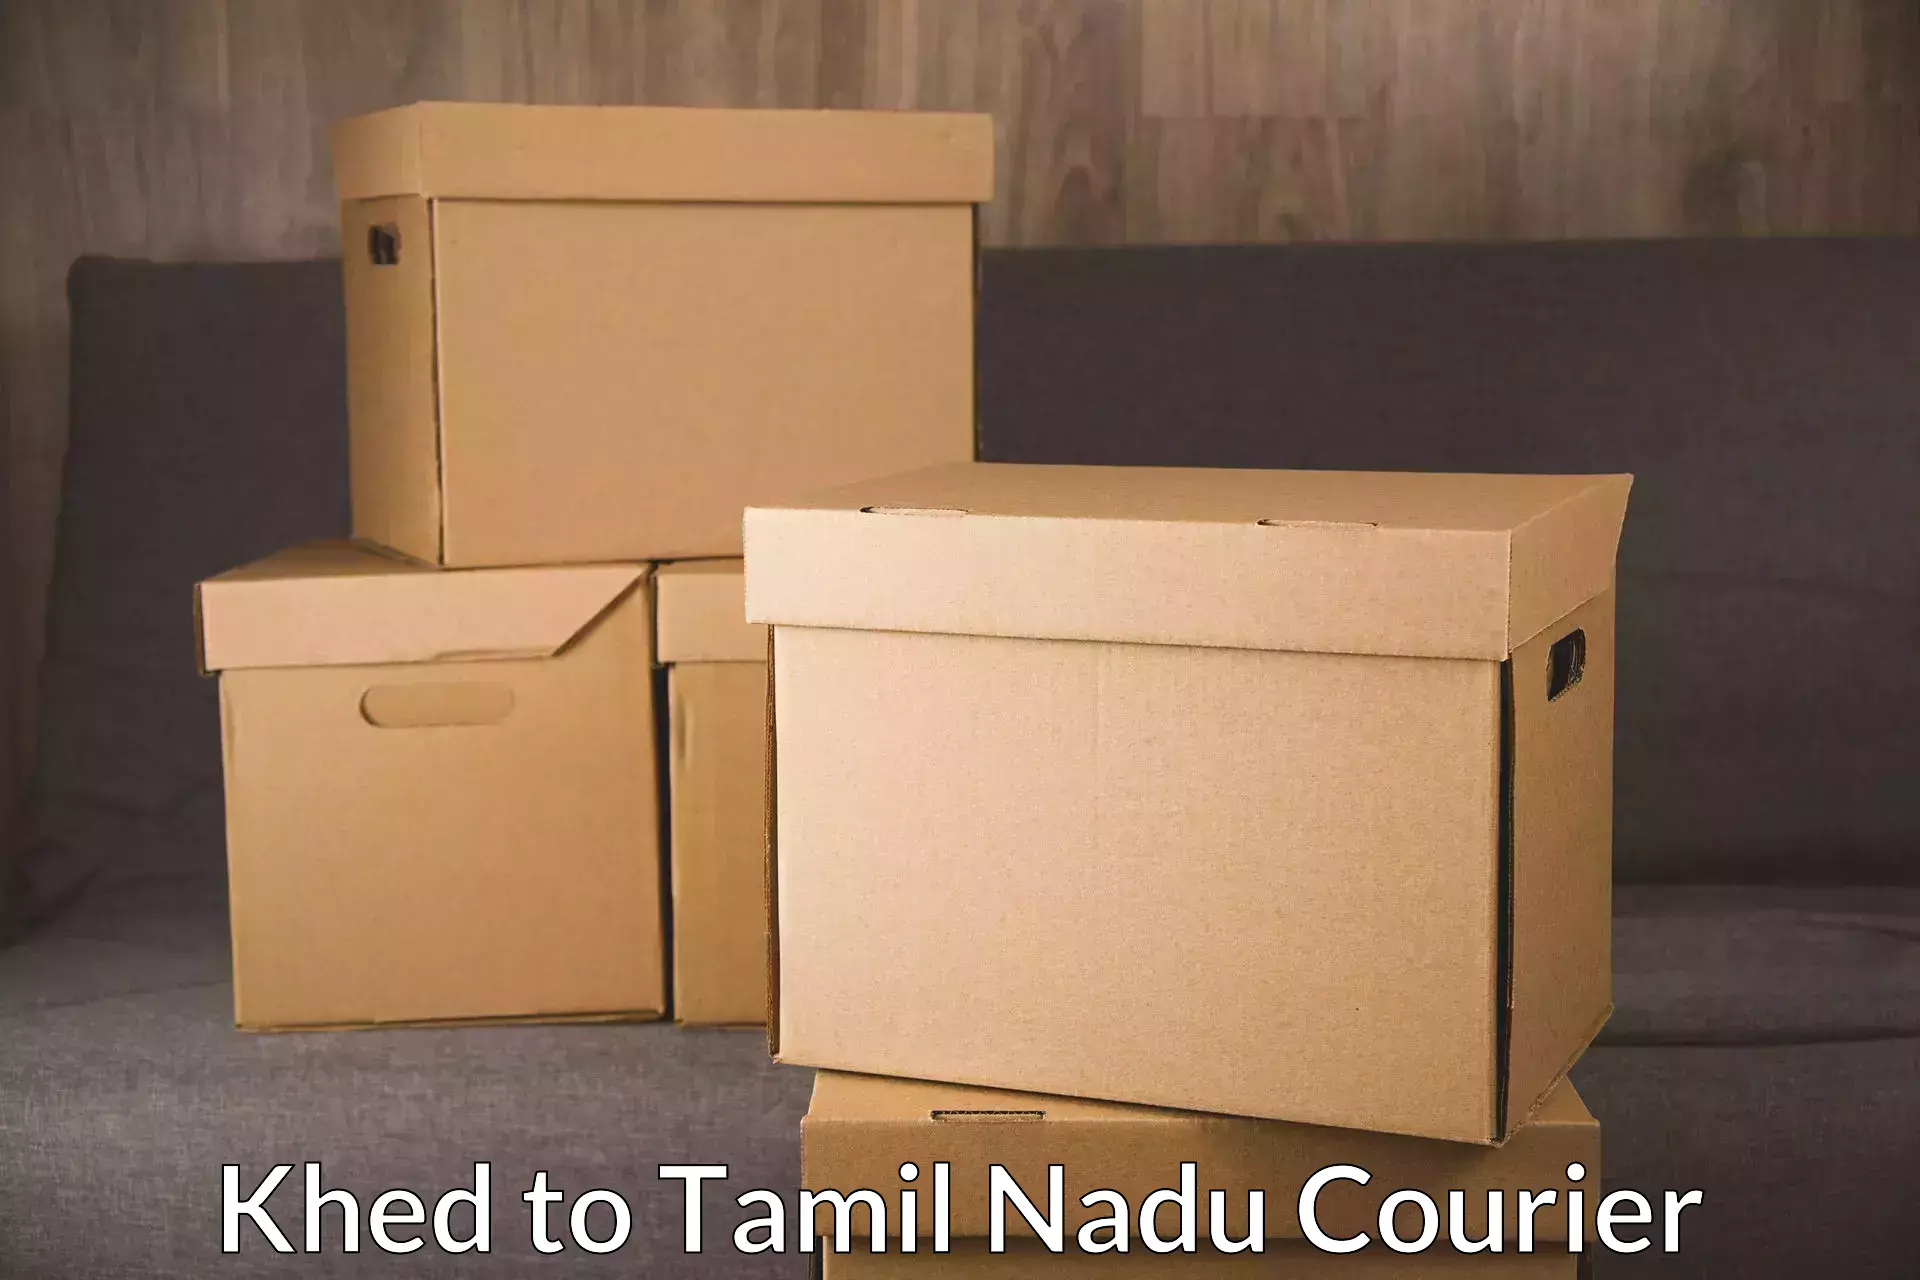 On-call courier service Khed to Tamil Nadu